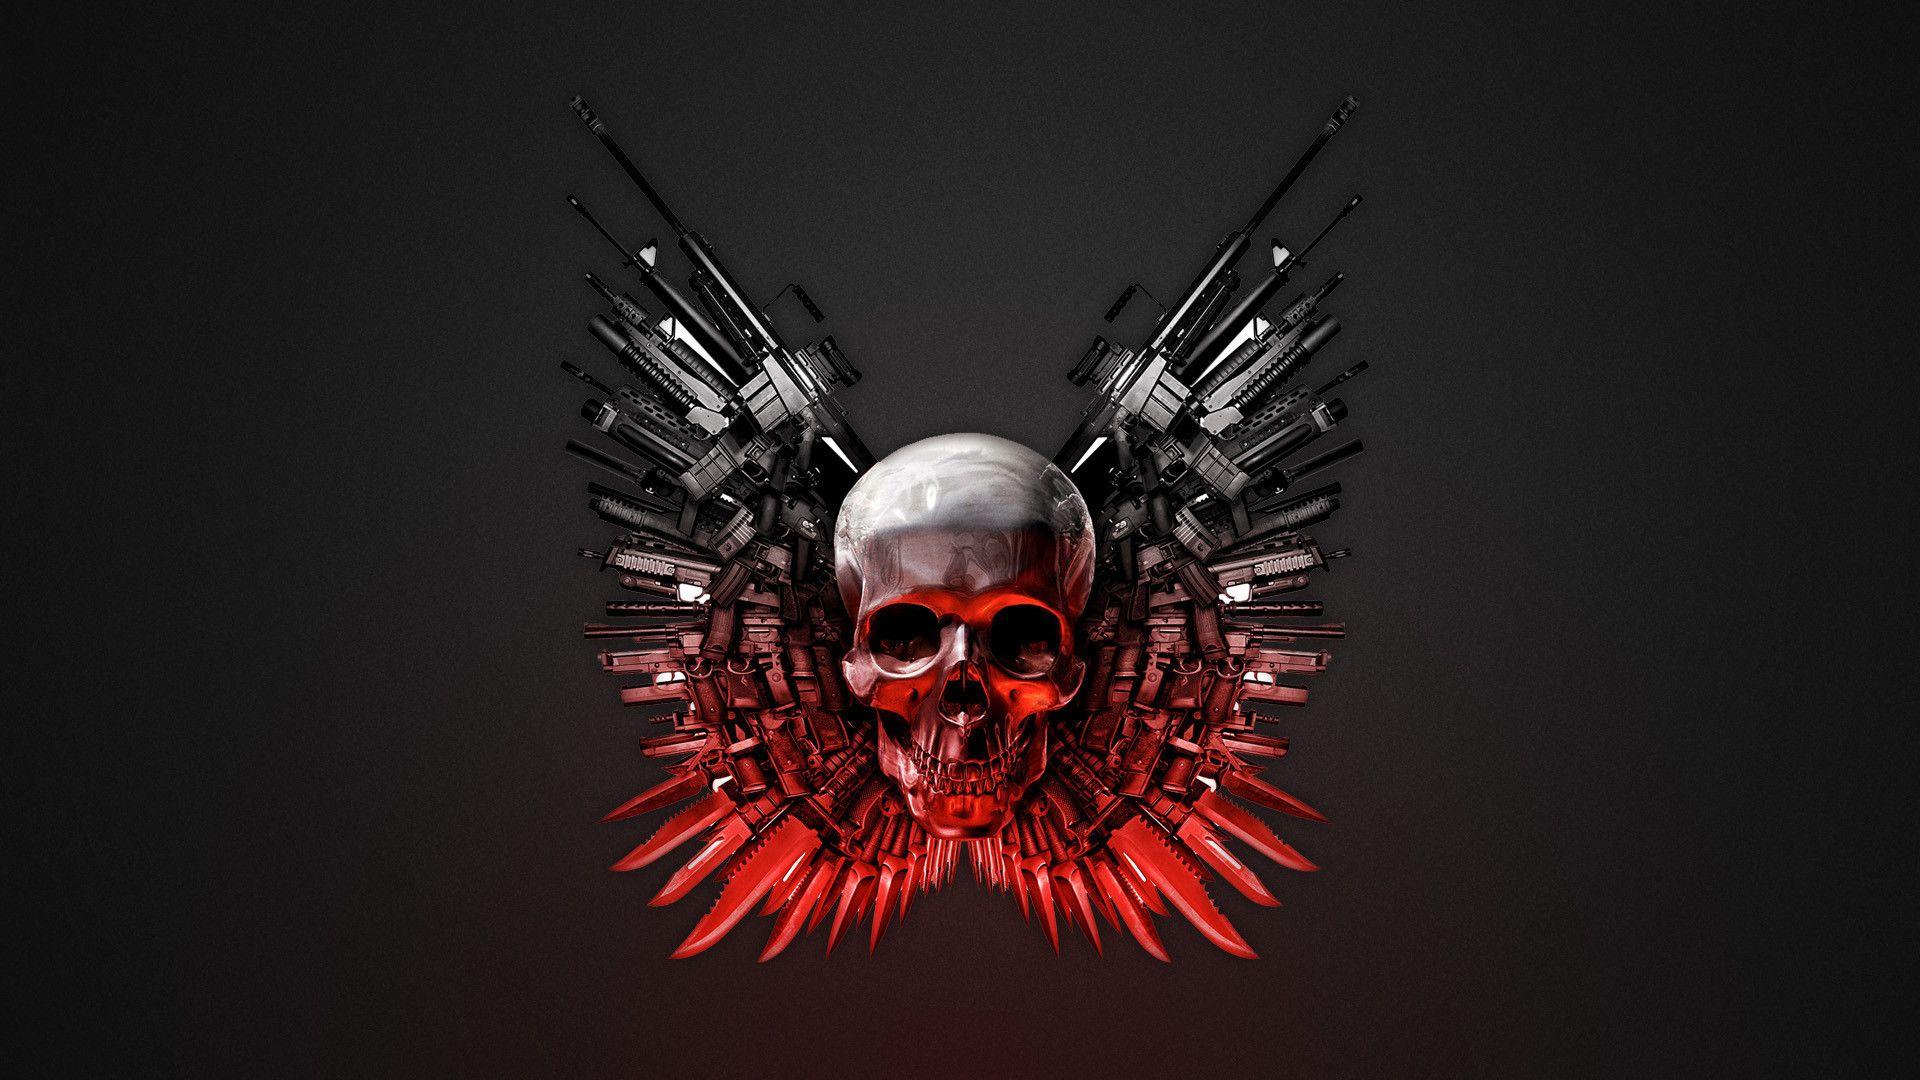 The Expendables Weapons Wallpaper